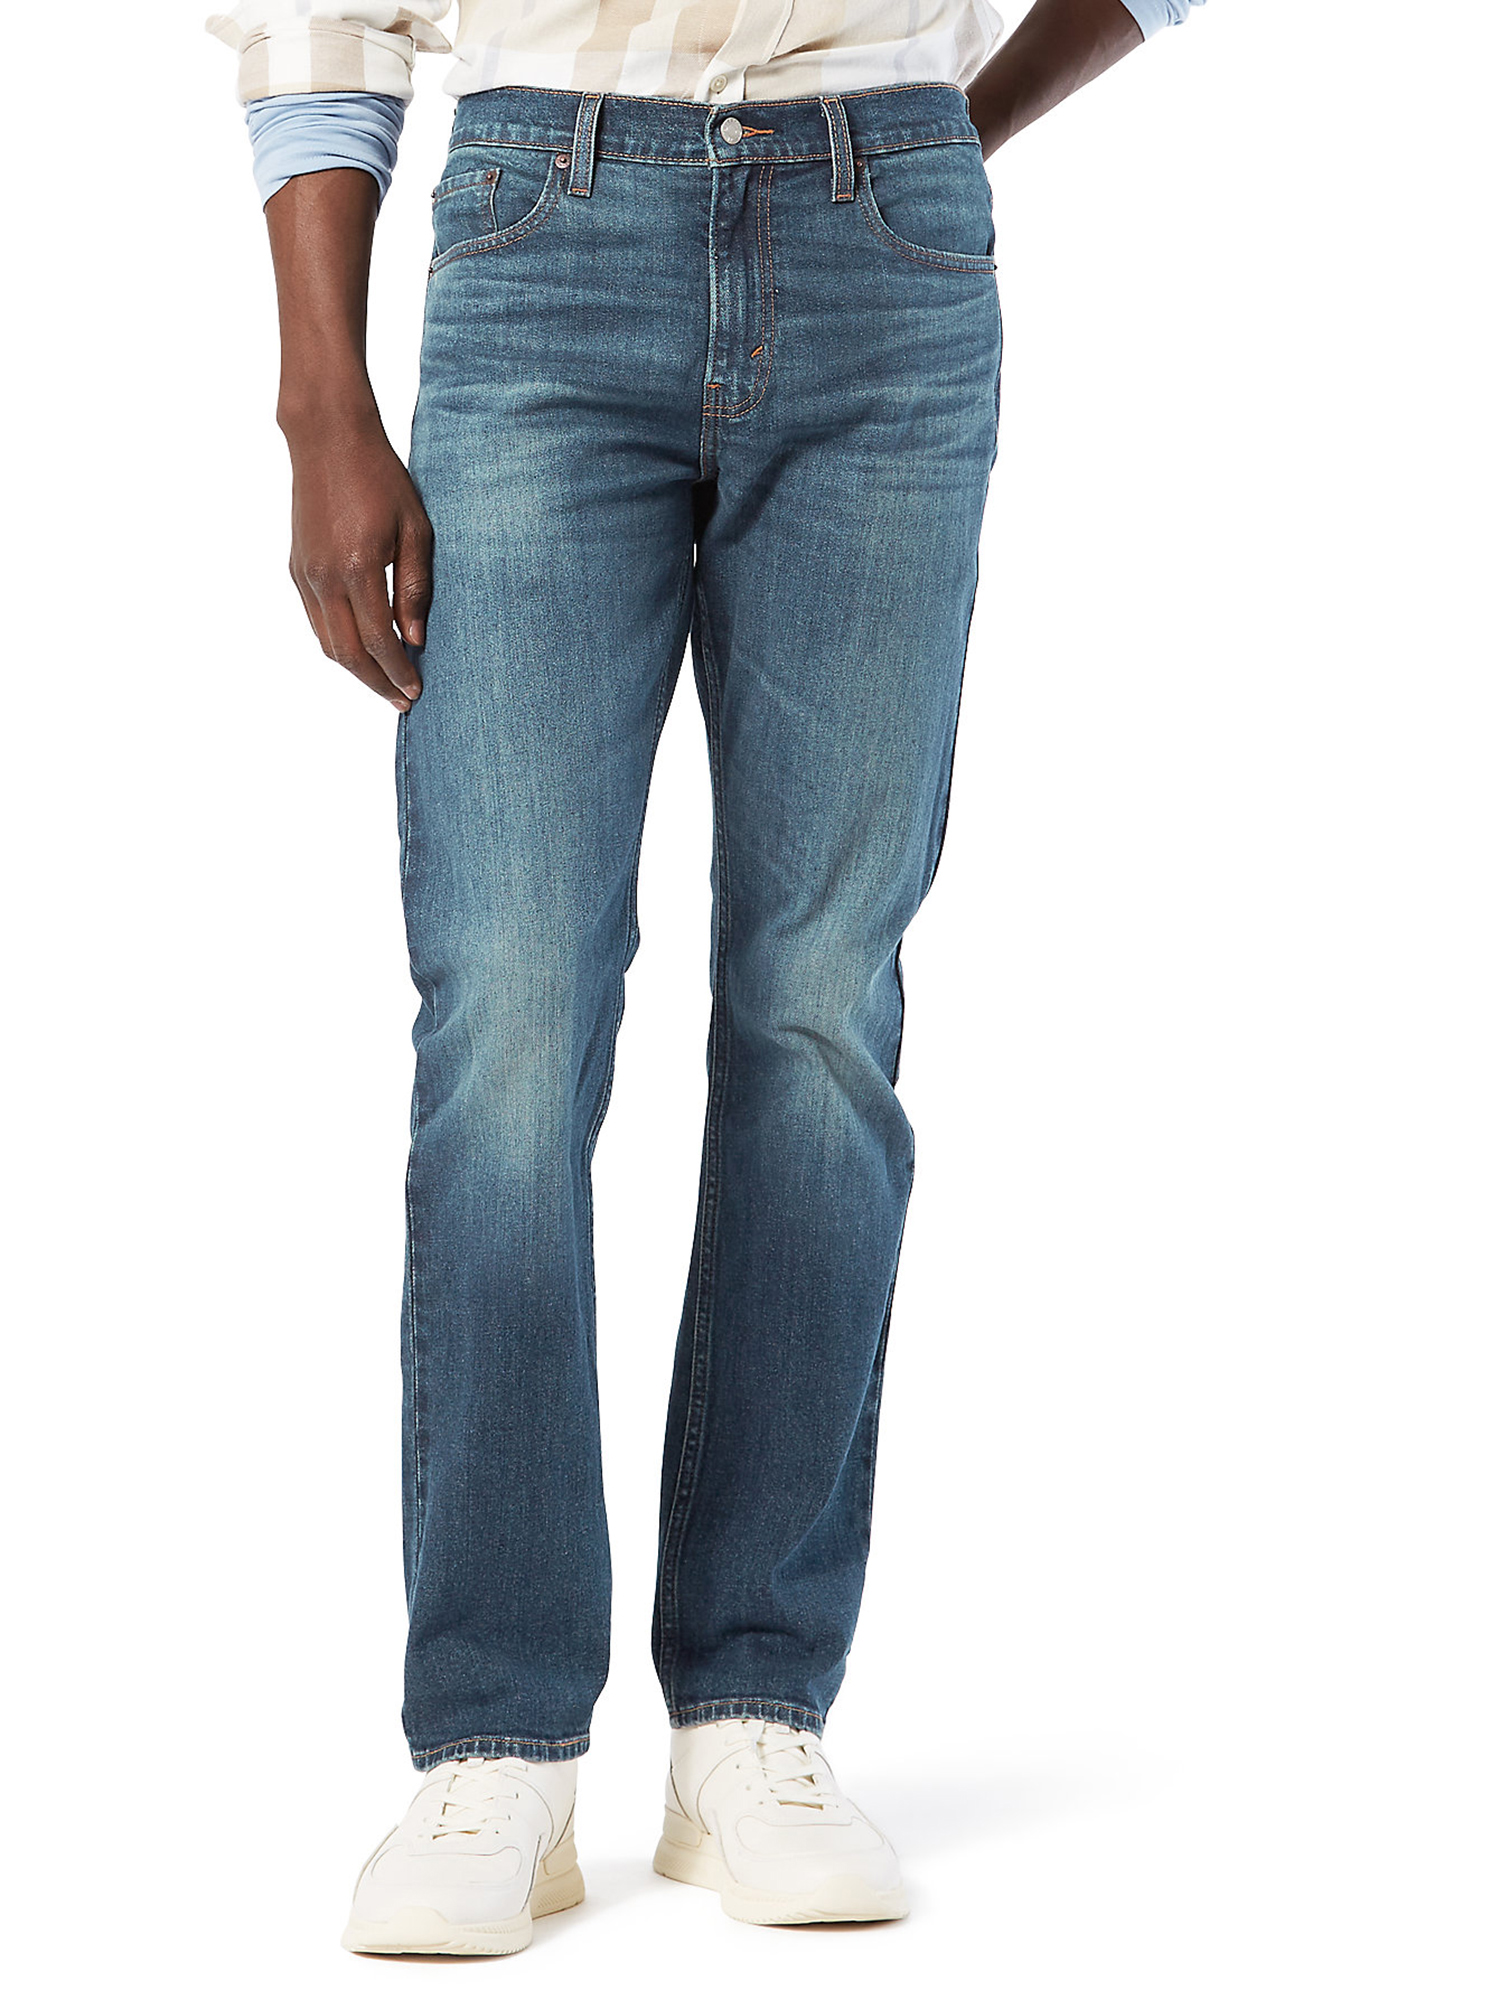 Signature By Levi Strauss & Co. Men's Straight Fit Jeans - image 1 of 5